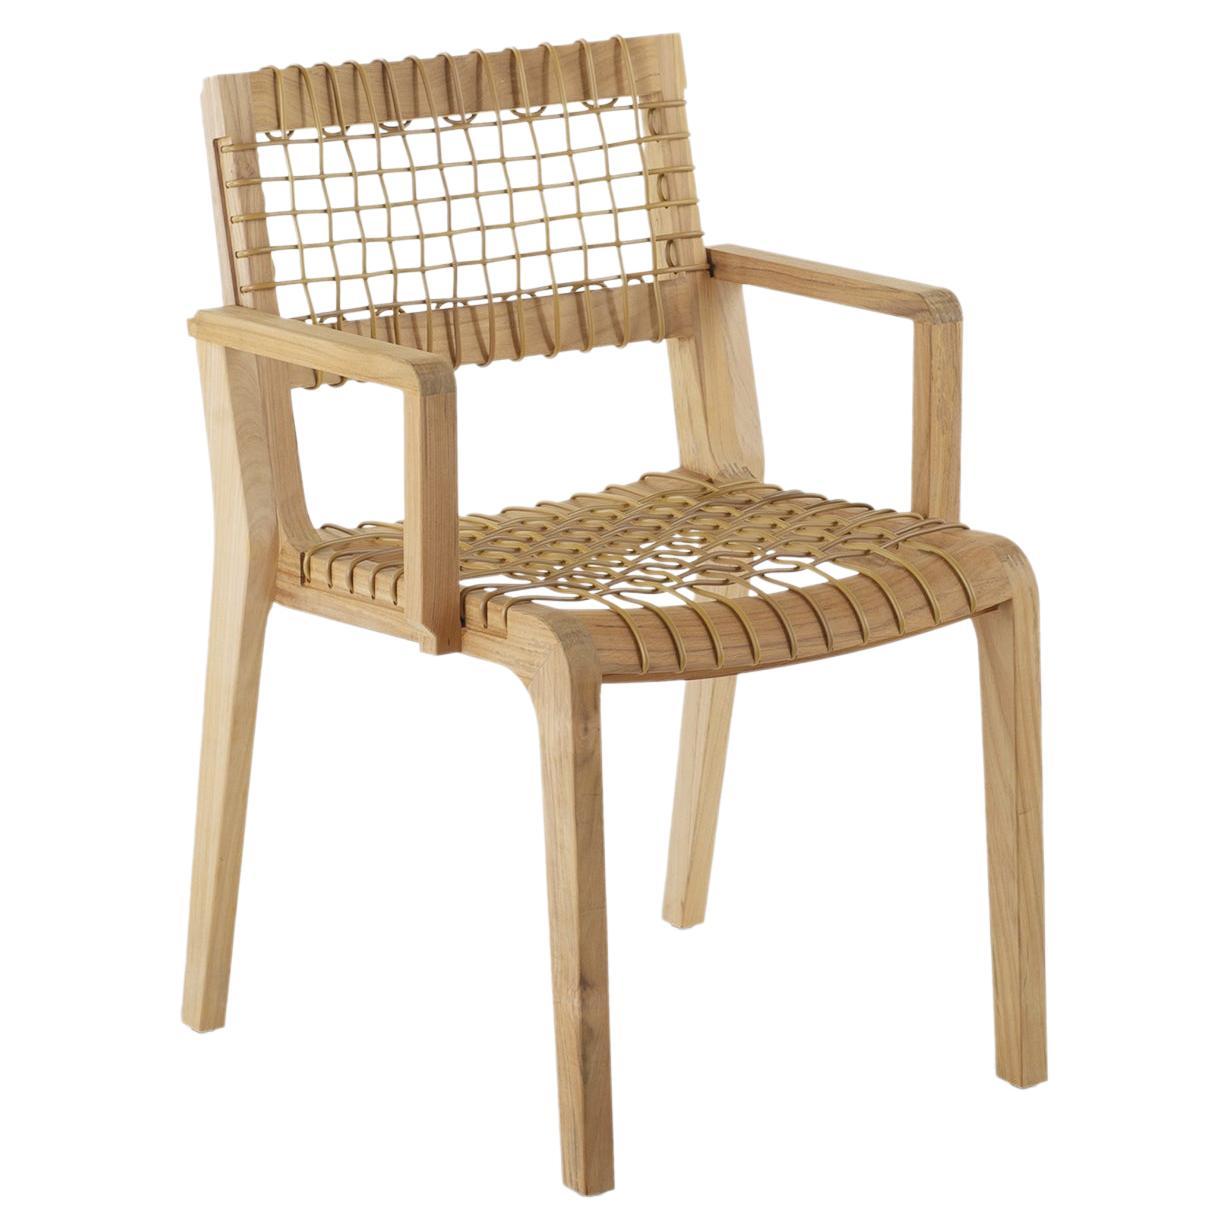 Unopiu' Synthesis Armchair Outdoor Collection - IN STOCK For Sale